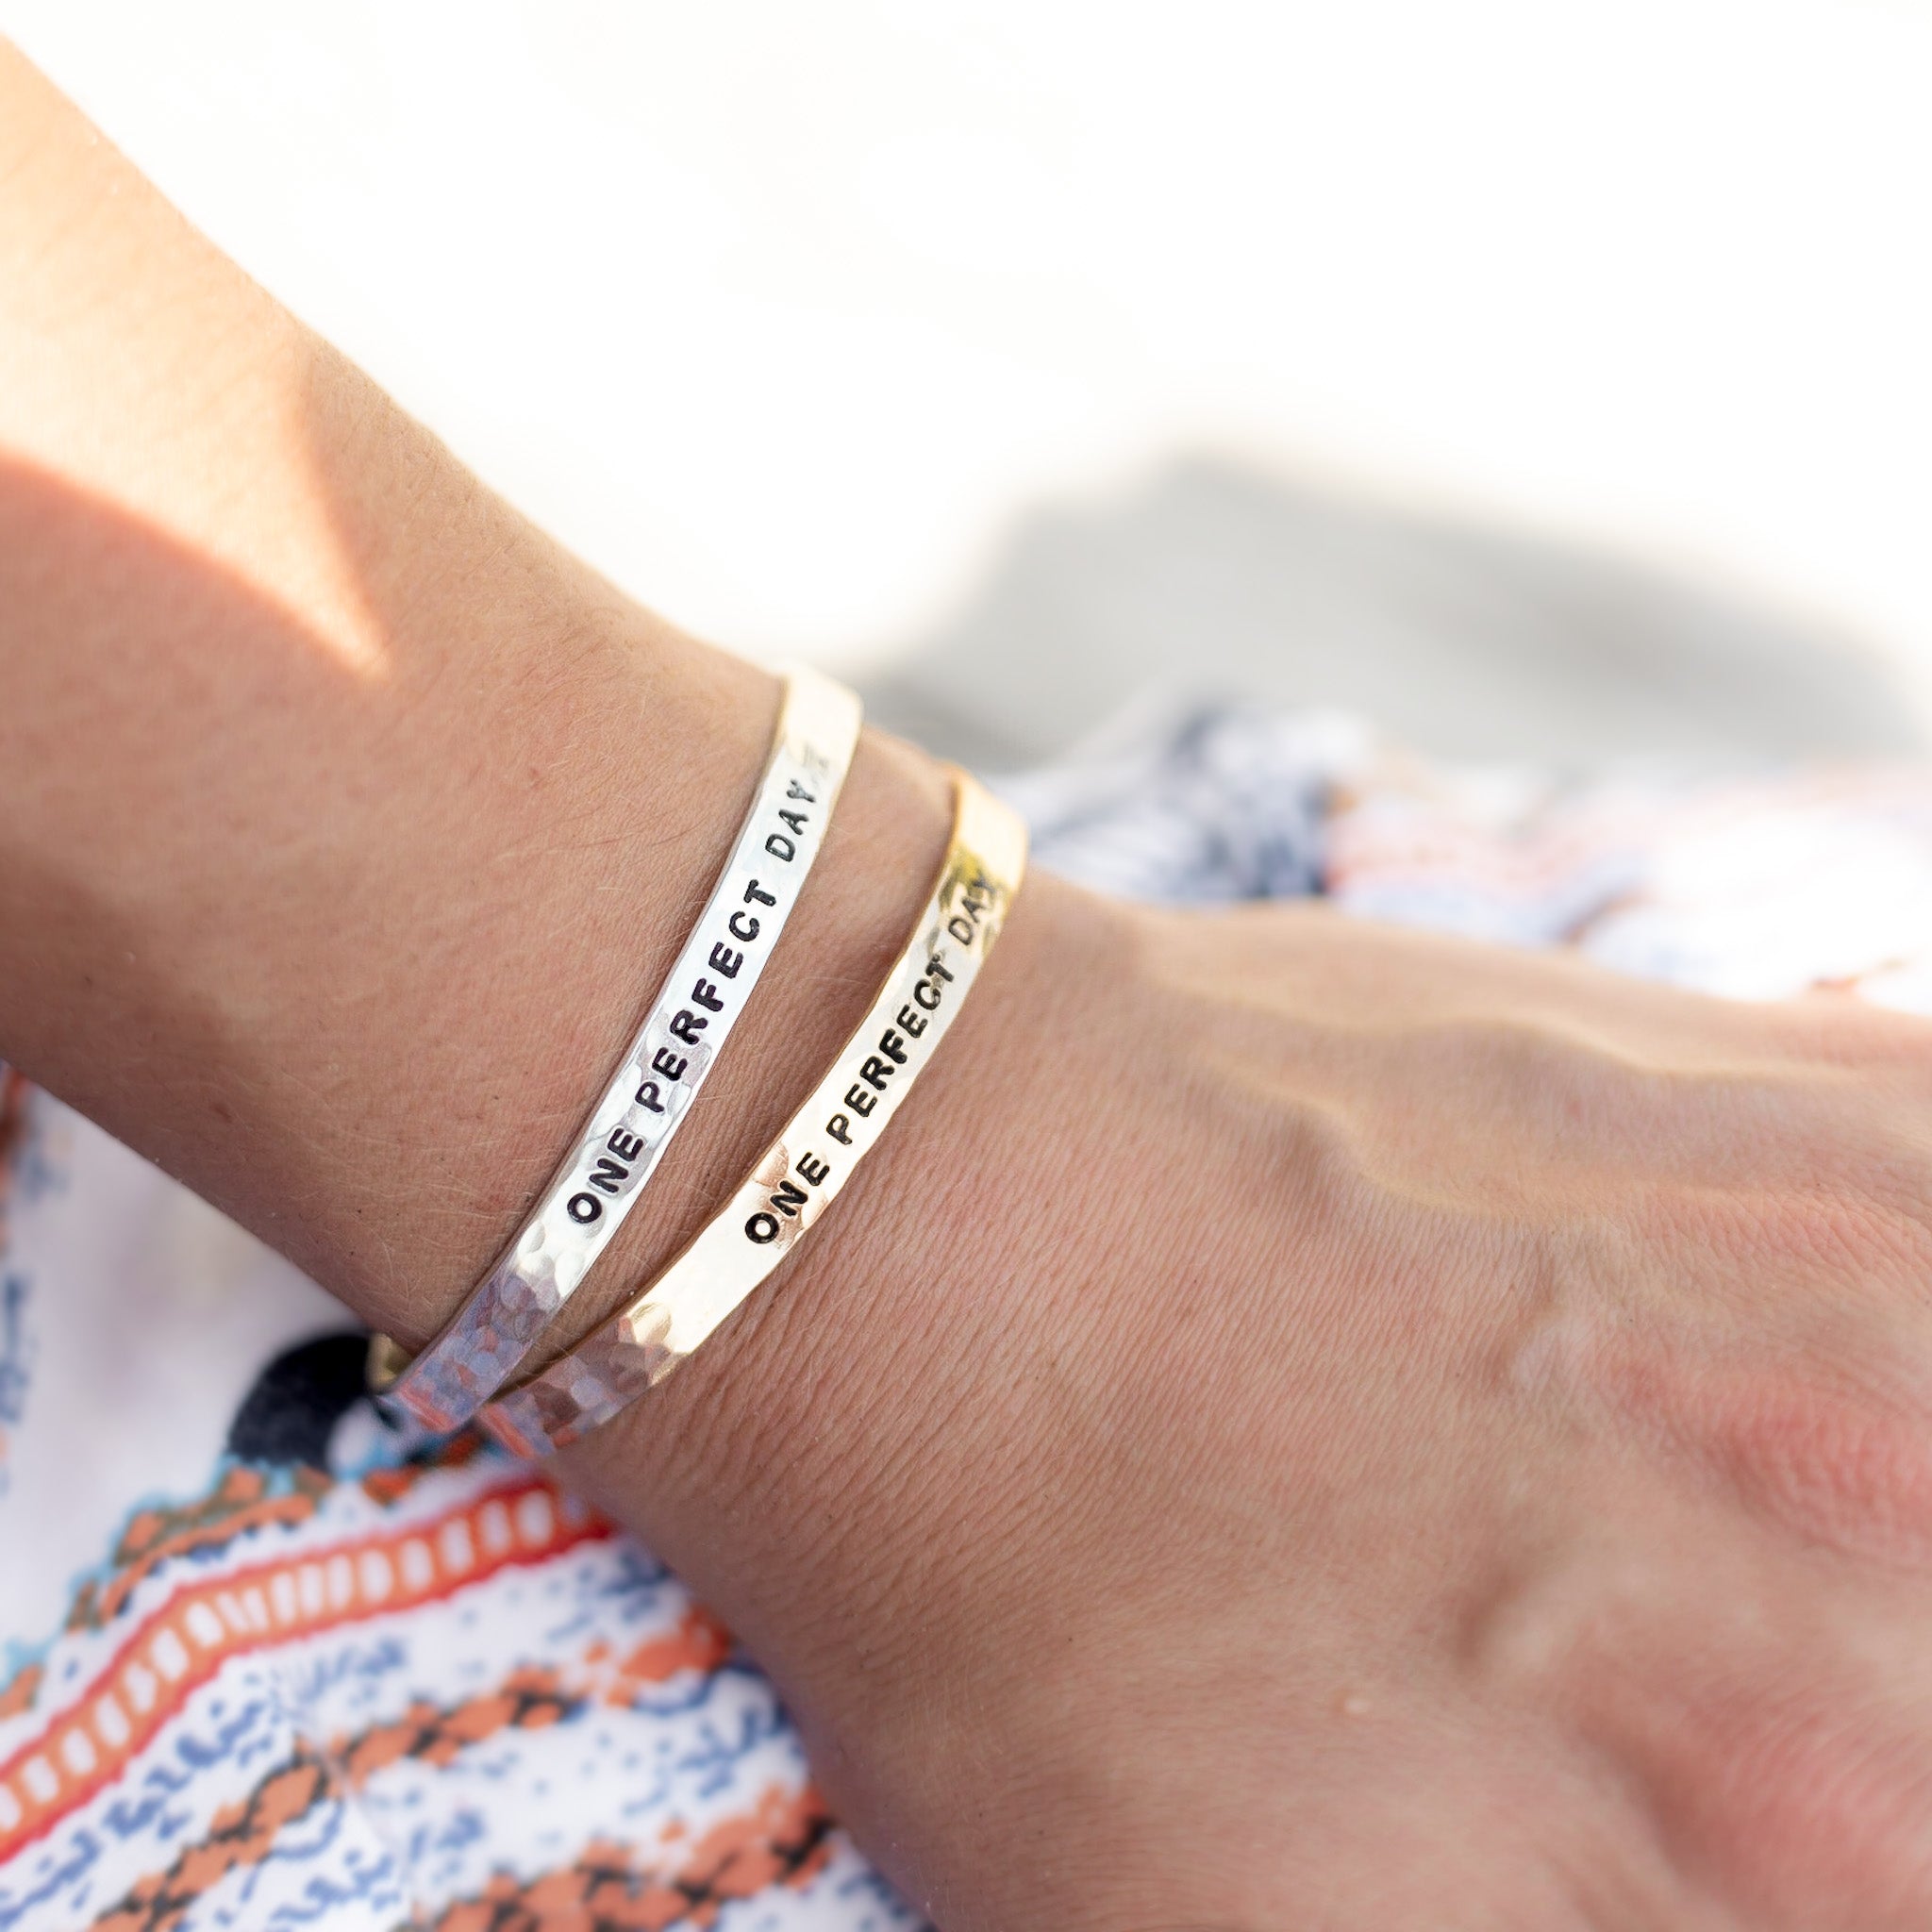 A gold filled and sterling silver cuff with the phrase "one perfect day" on it. Shown on a woman's wrist.